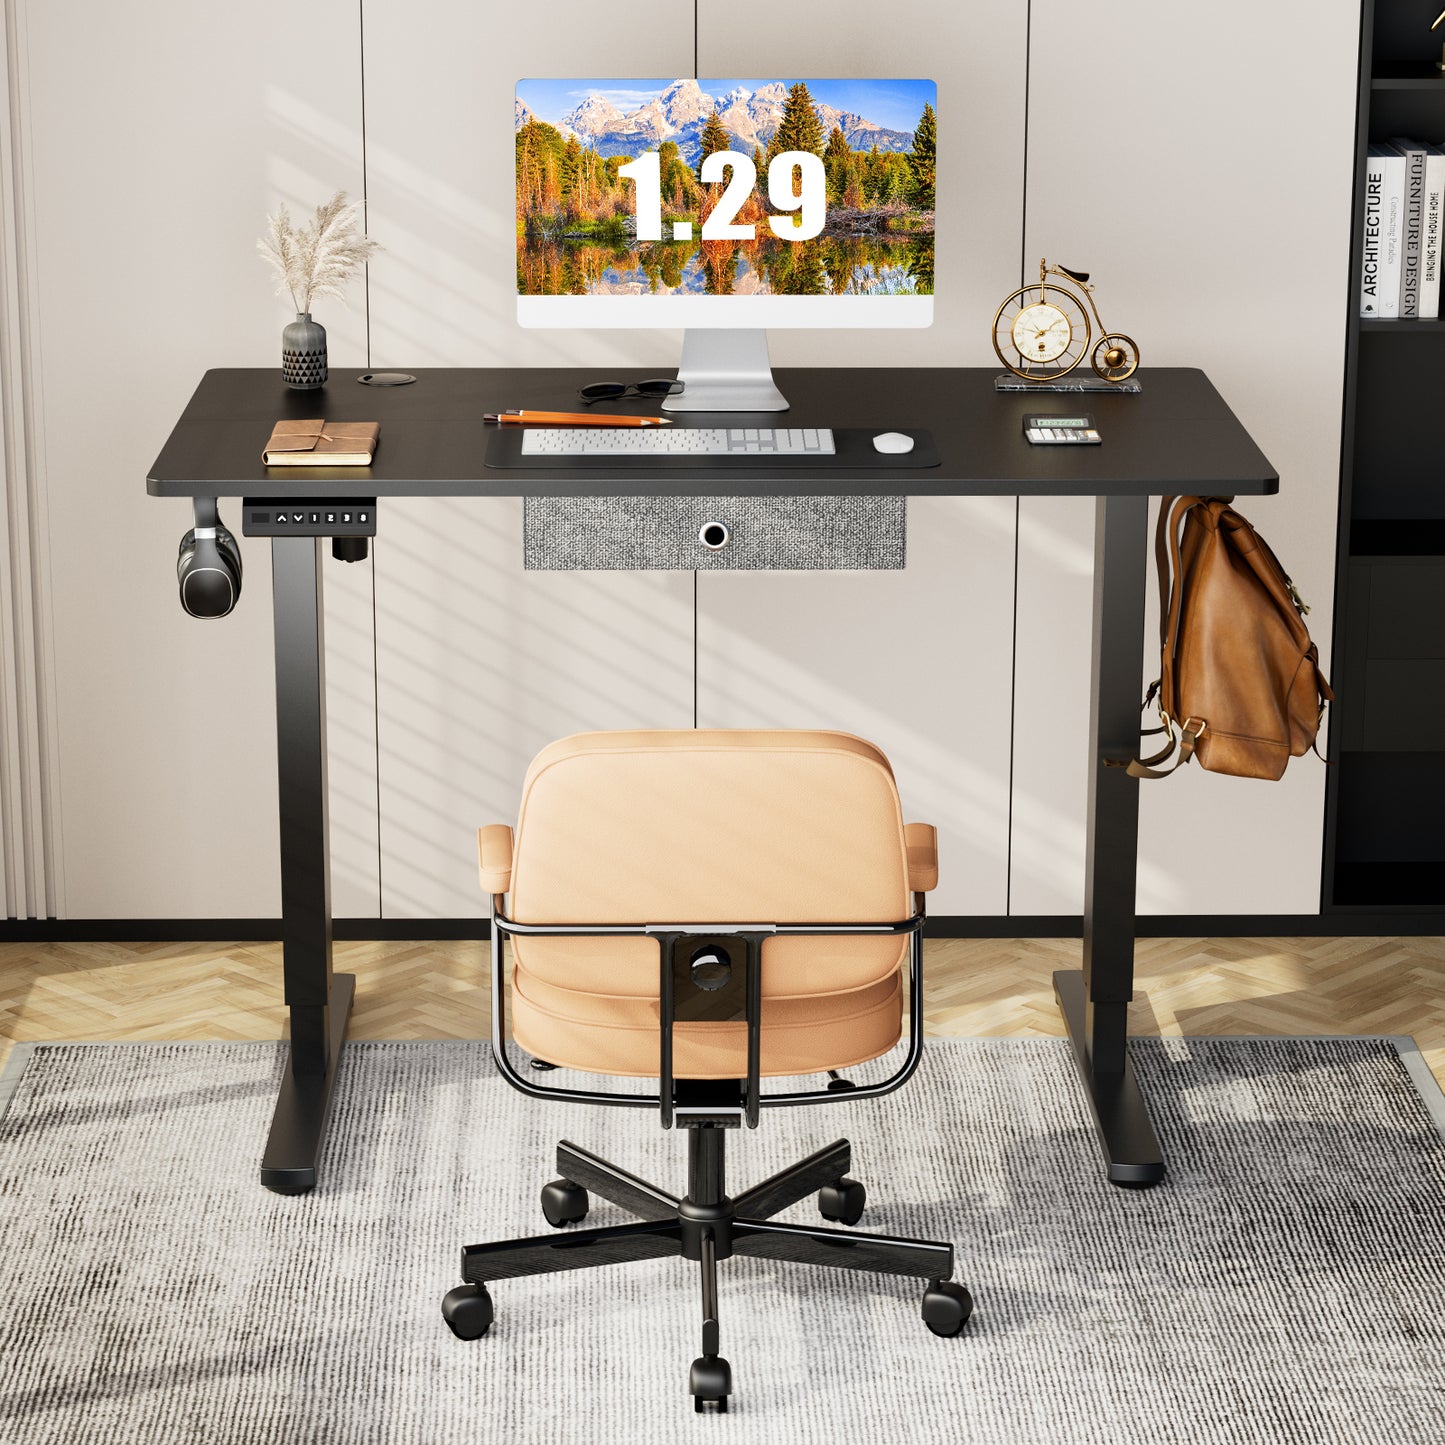 Adjustable Height Electric Standing Desk with Spacious Drawer - Black, 48 x 24 Inches